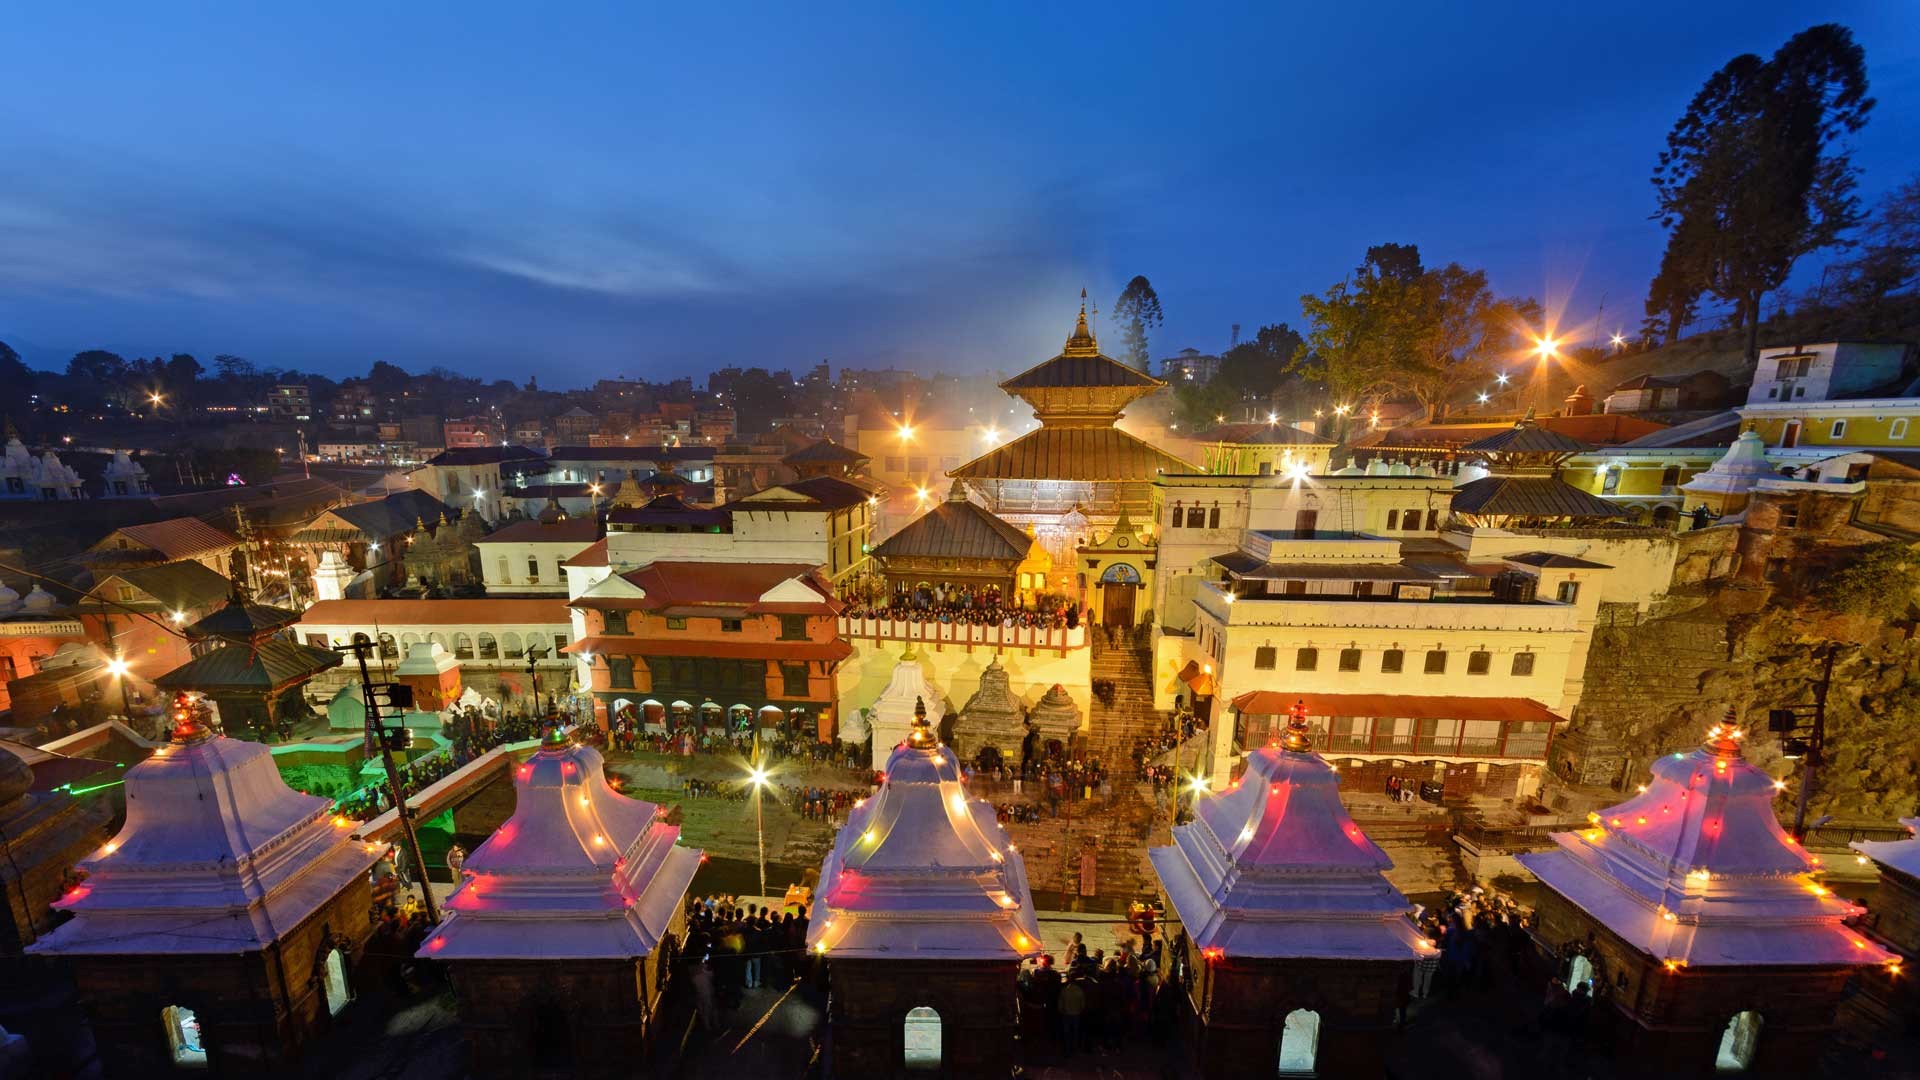 Why does Kathmandu charge foreigners hefty fees to enter heritage sites?